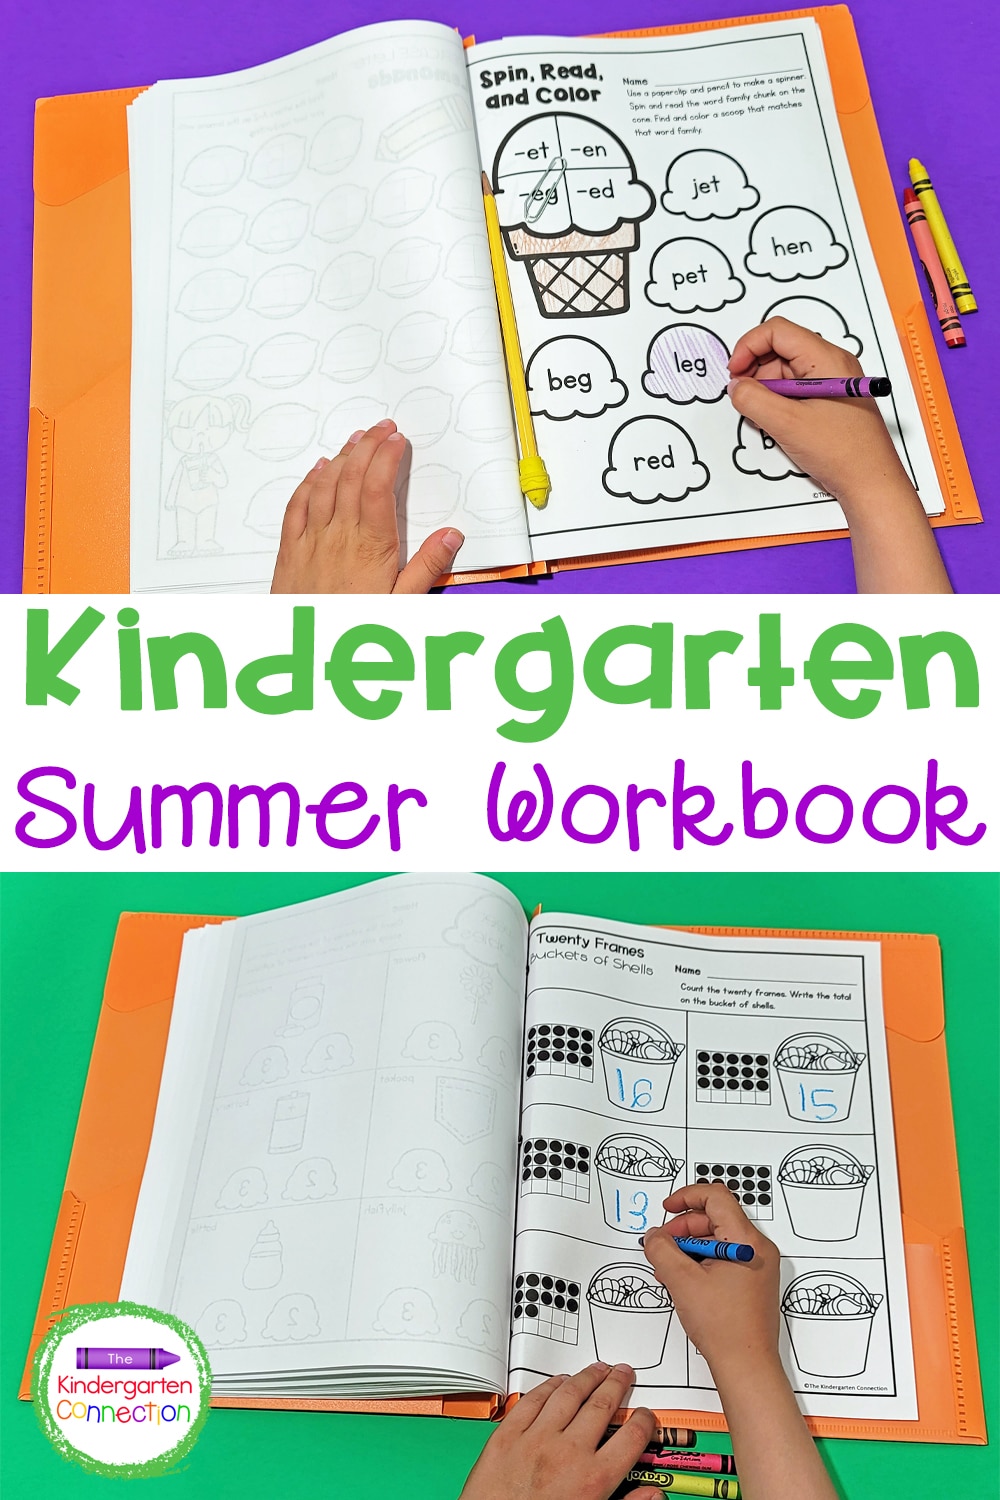 This Kindergarten Summer Homework pack of low-prep, math and literacy printables will keep your students learning while still having fun over break!